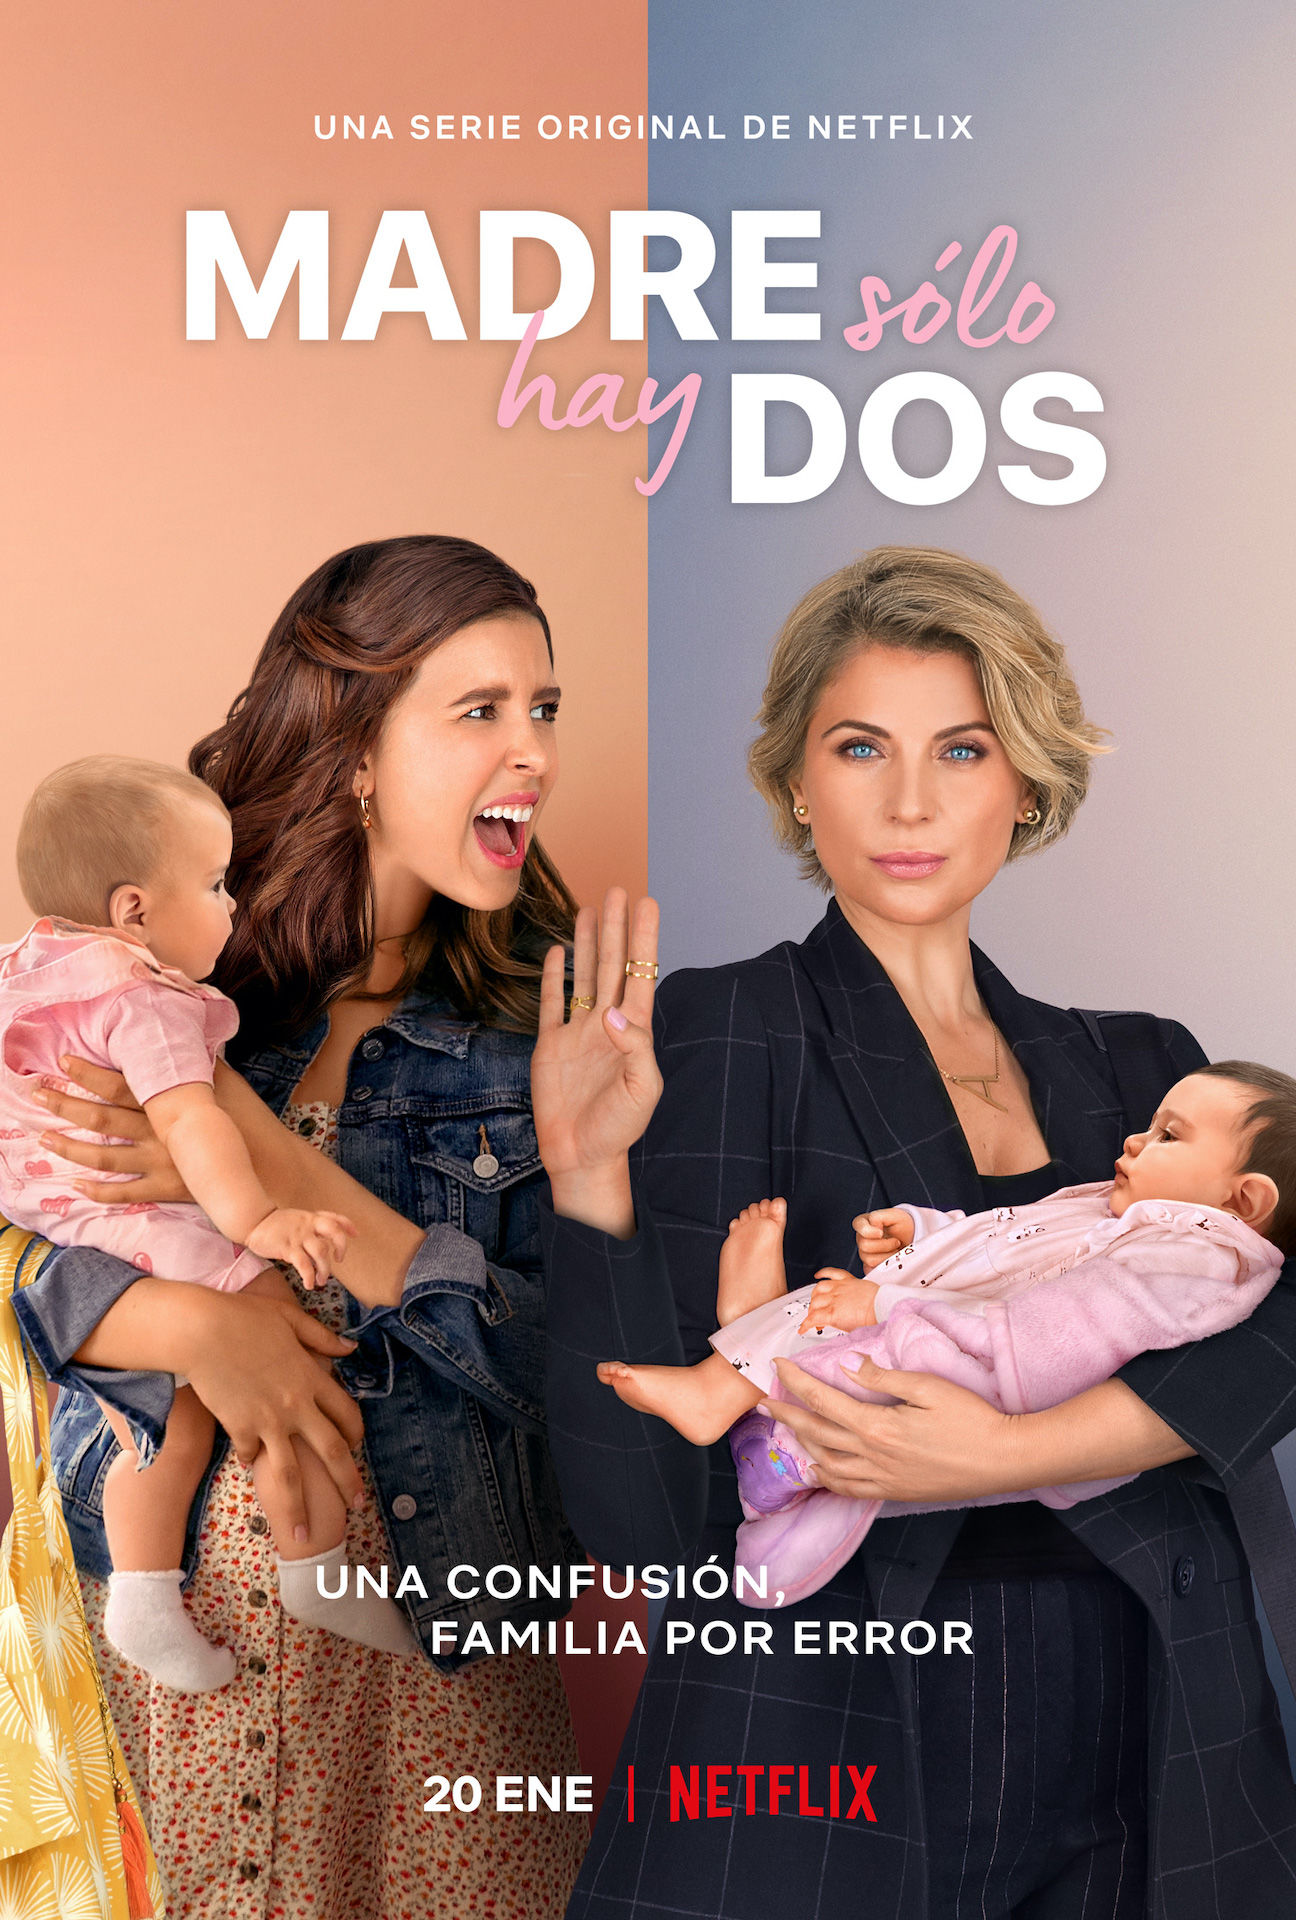 Daughter from Another Mother  (S01 - S02) Madre Solo hay Dos